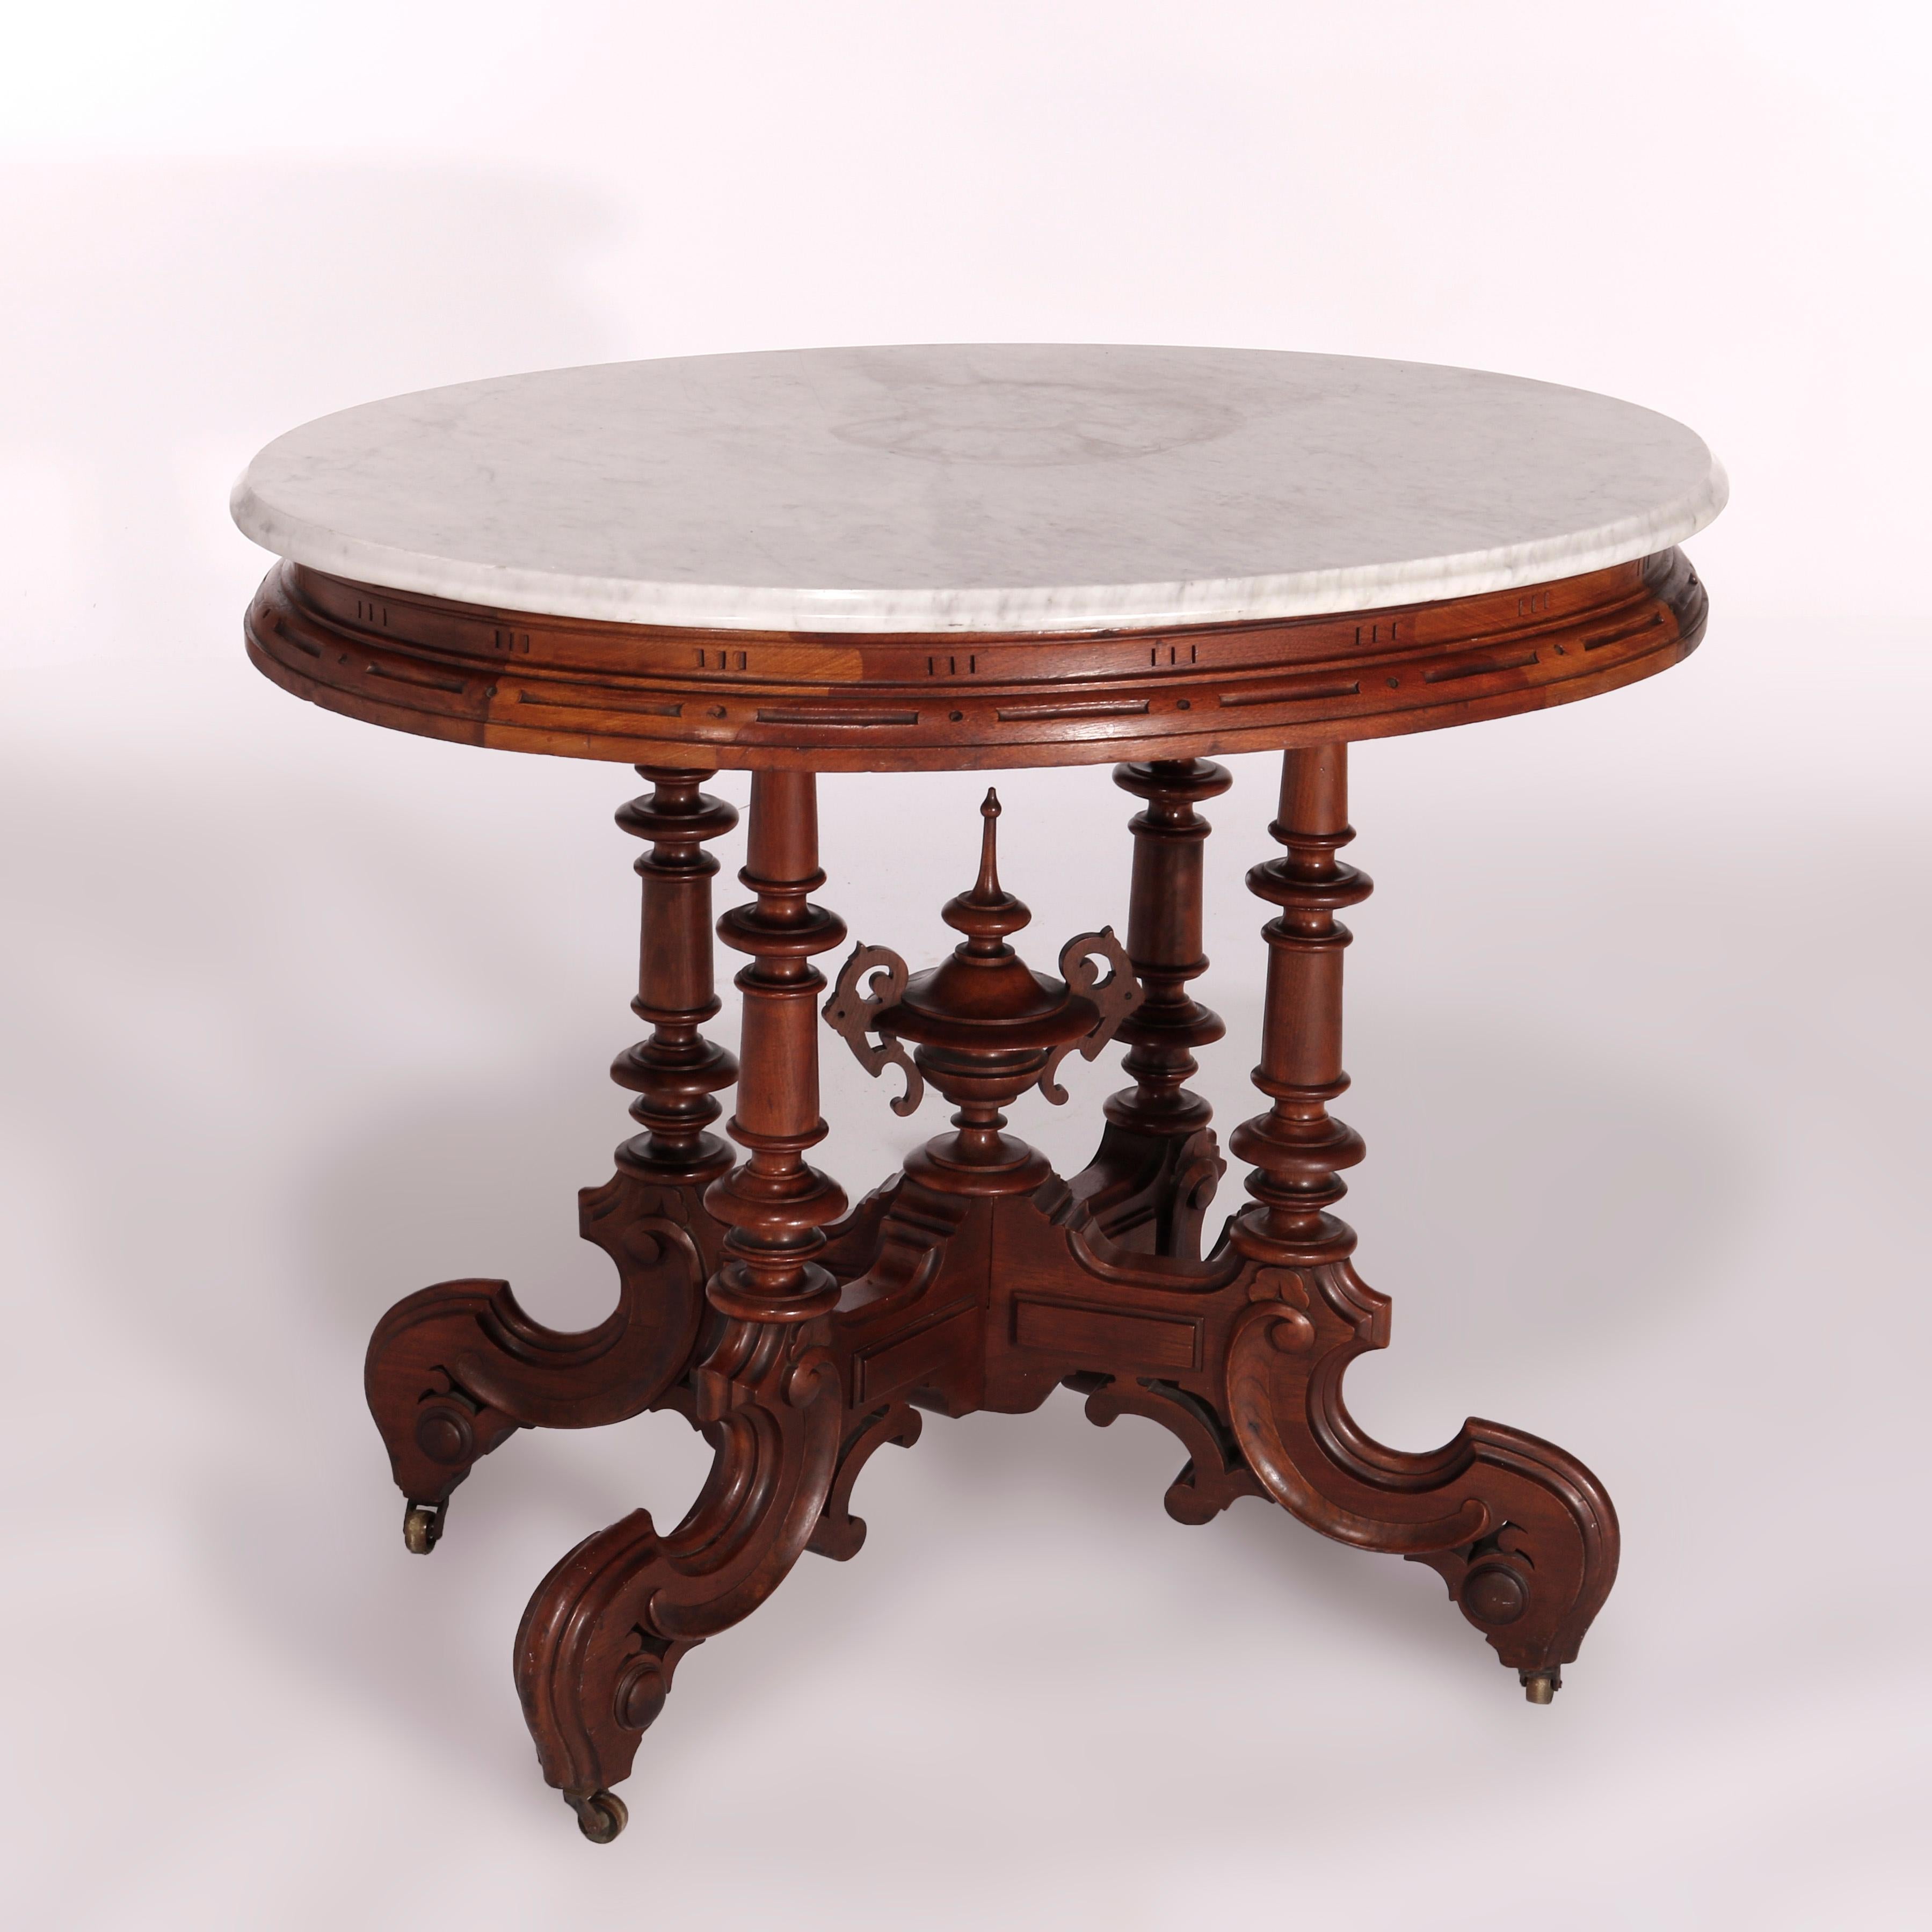 Antique Victorian Brooks Brothers Walnut & Marble Parlor Table, circa 1890 For Sale 4